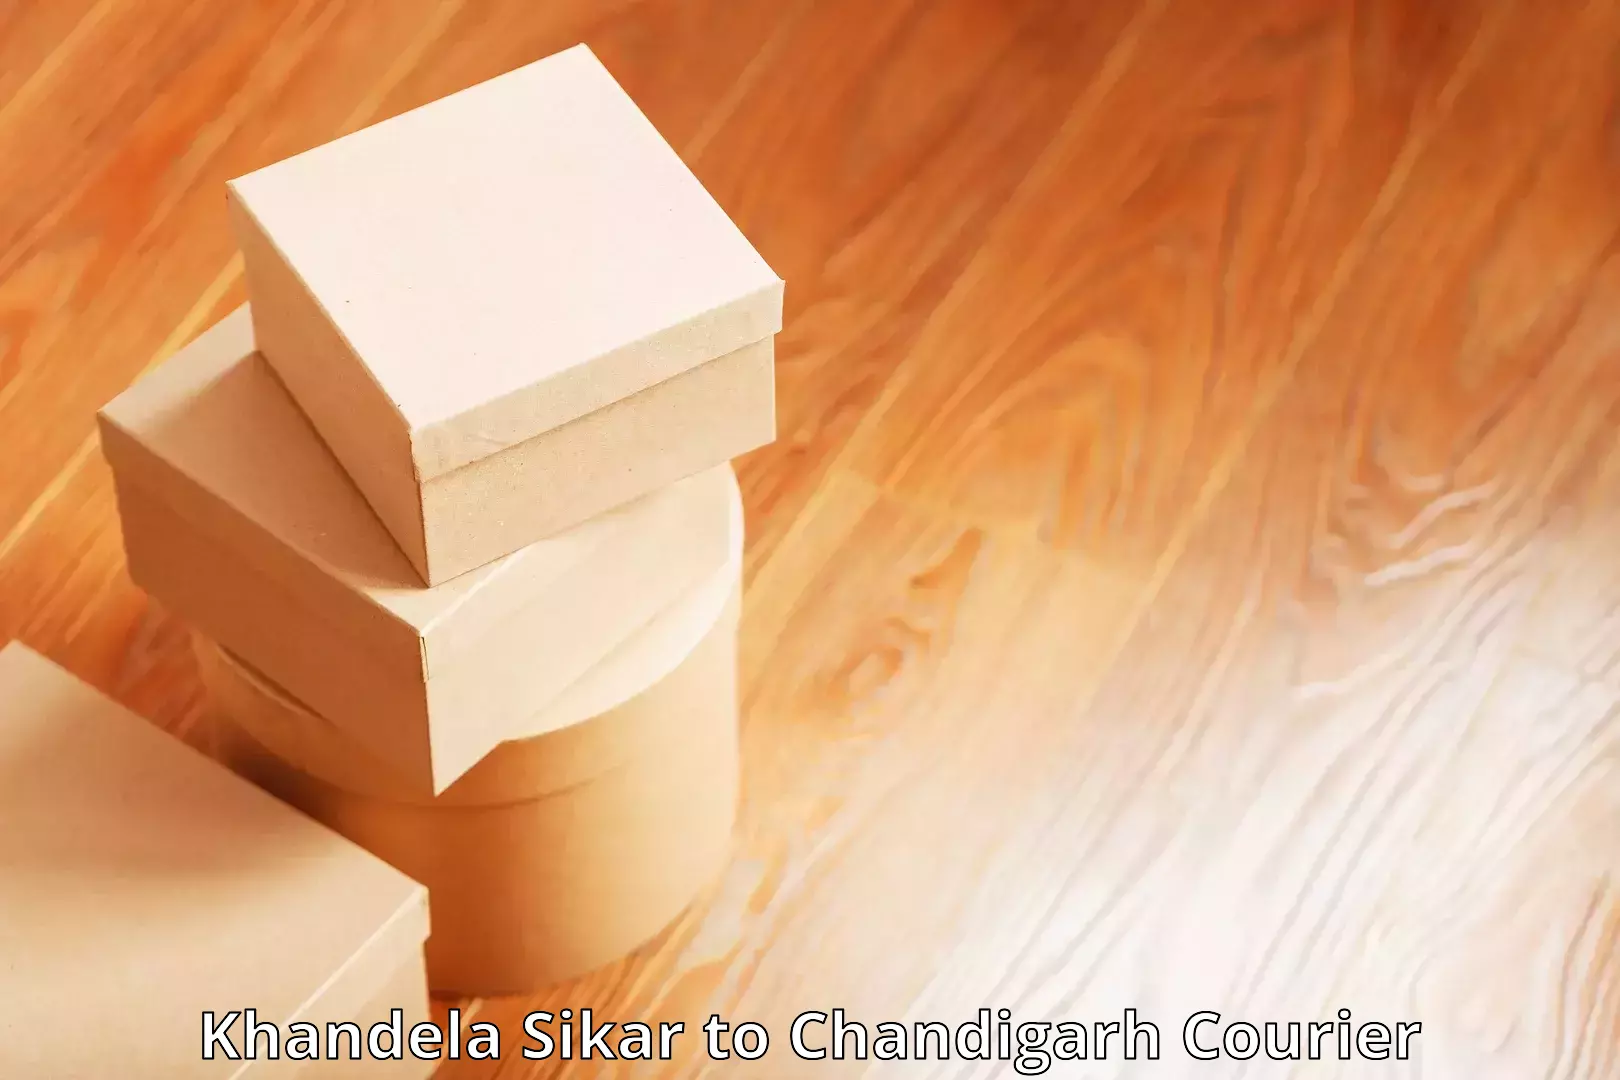 Reliable courier service Khandela Sikar to Chandigarh